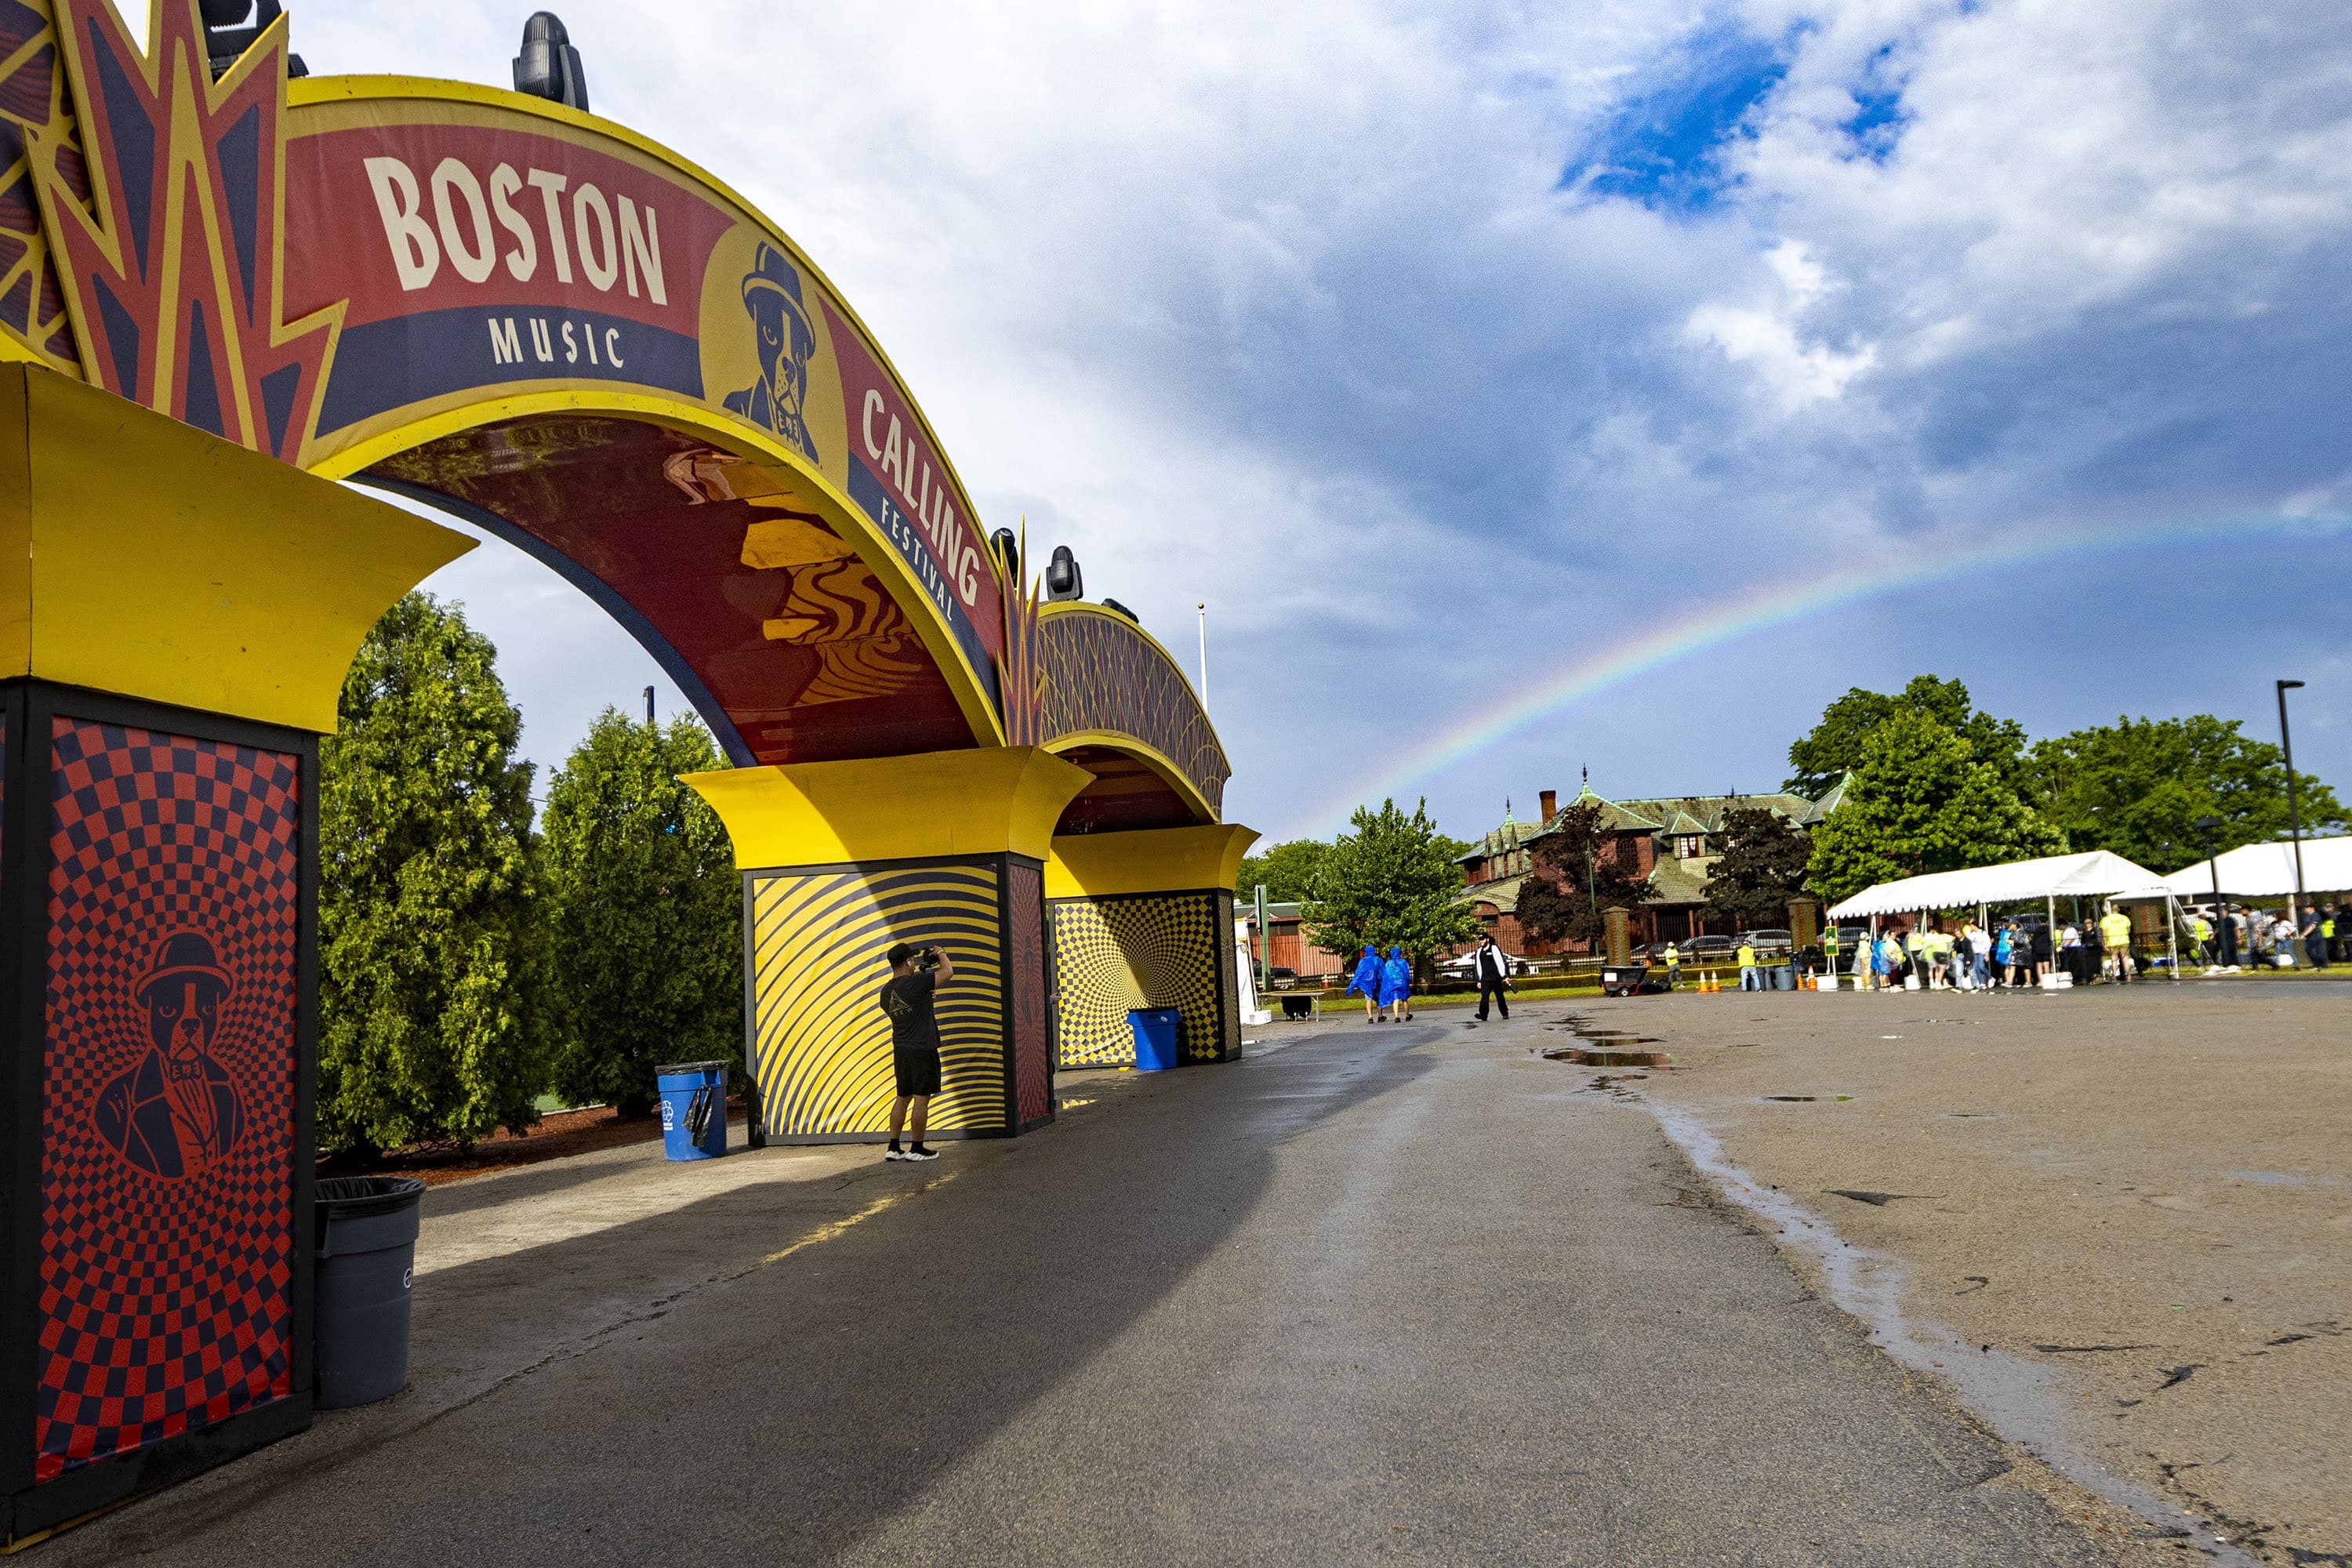 A rainbow appears after the severe thunderstorm roll through Boston at the Boston Calling Music Festival. (Jesse Costa/WBUR)